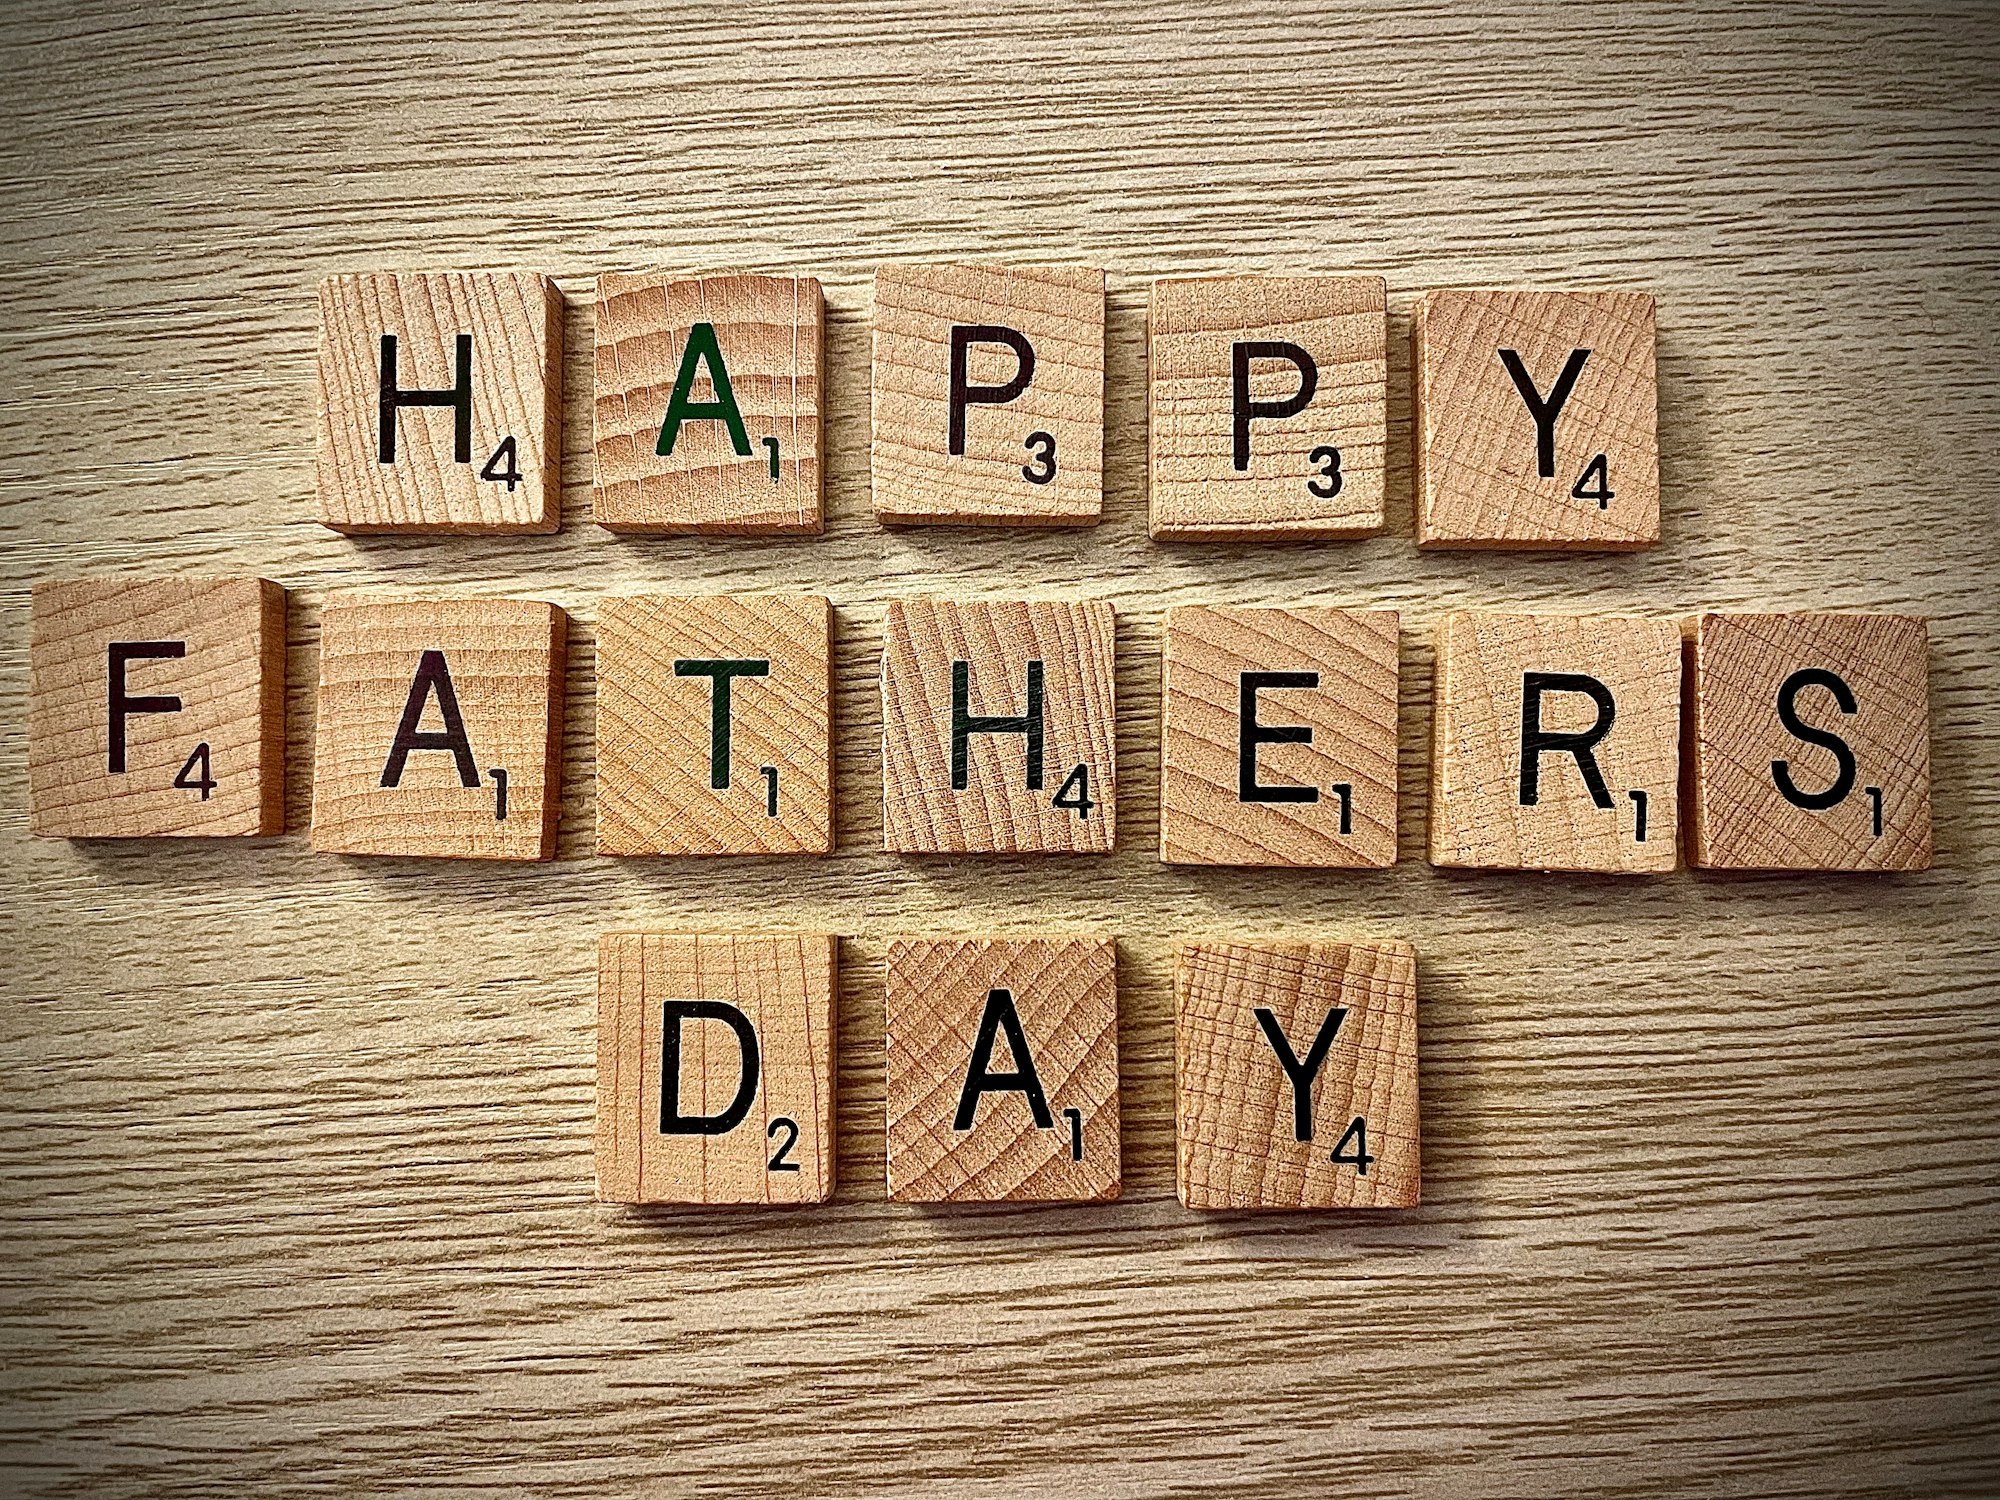 What Was The First Country To Celebrate Father's Day?